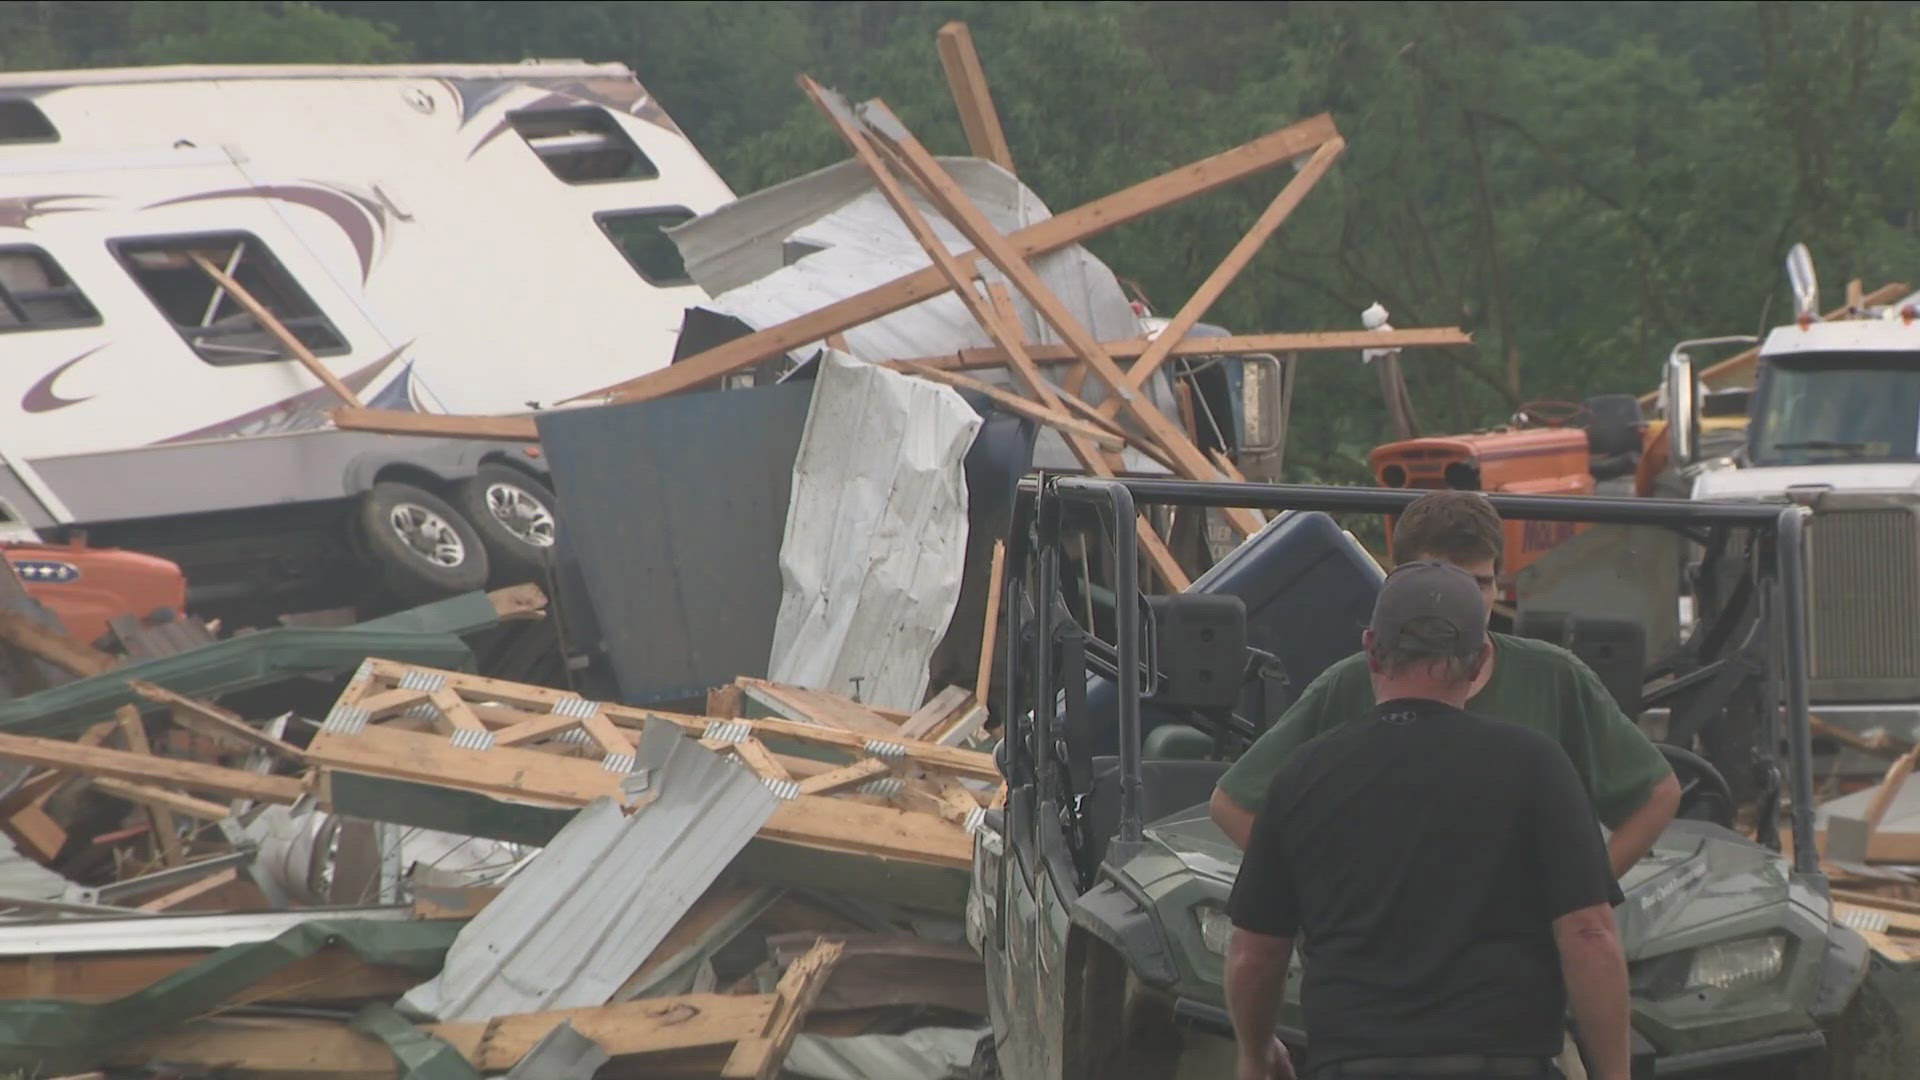 A State of Emergency was issued in Eden after a tornado touched down there Wednesday afternoon.